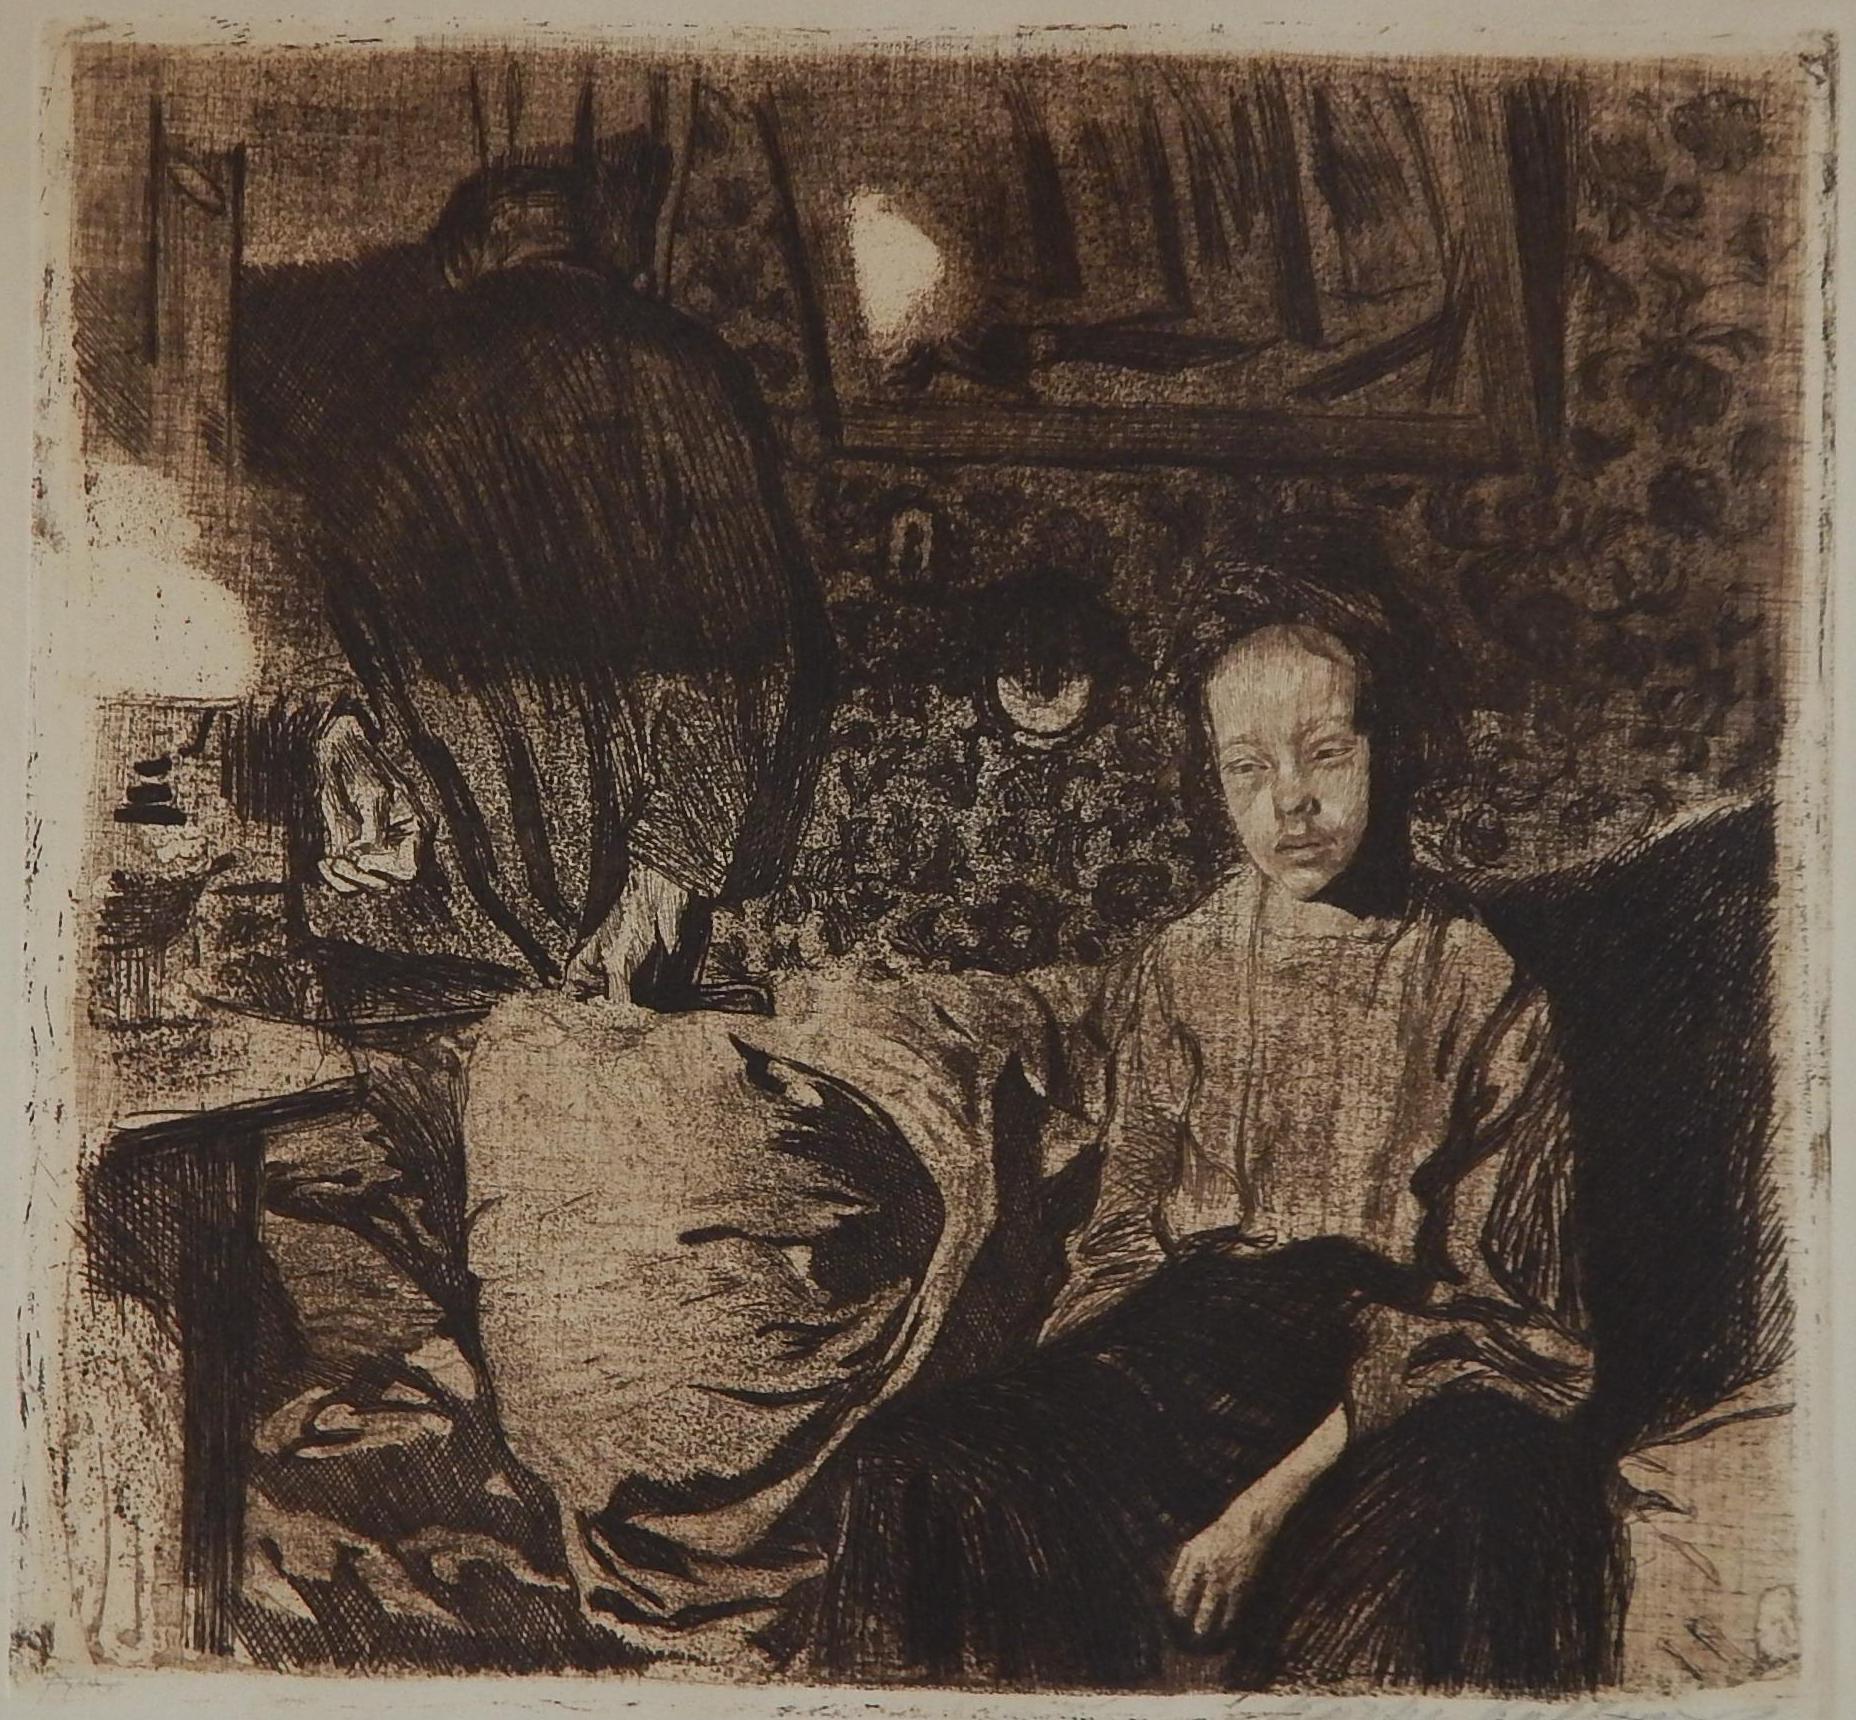 Etching and Aquatint by German artist Kathe Kollwitz.
Titled: “Junges Paar.” Matted and unframed.
Created in Berlin, 1904. Image measures: 11 3/4